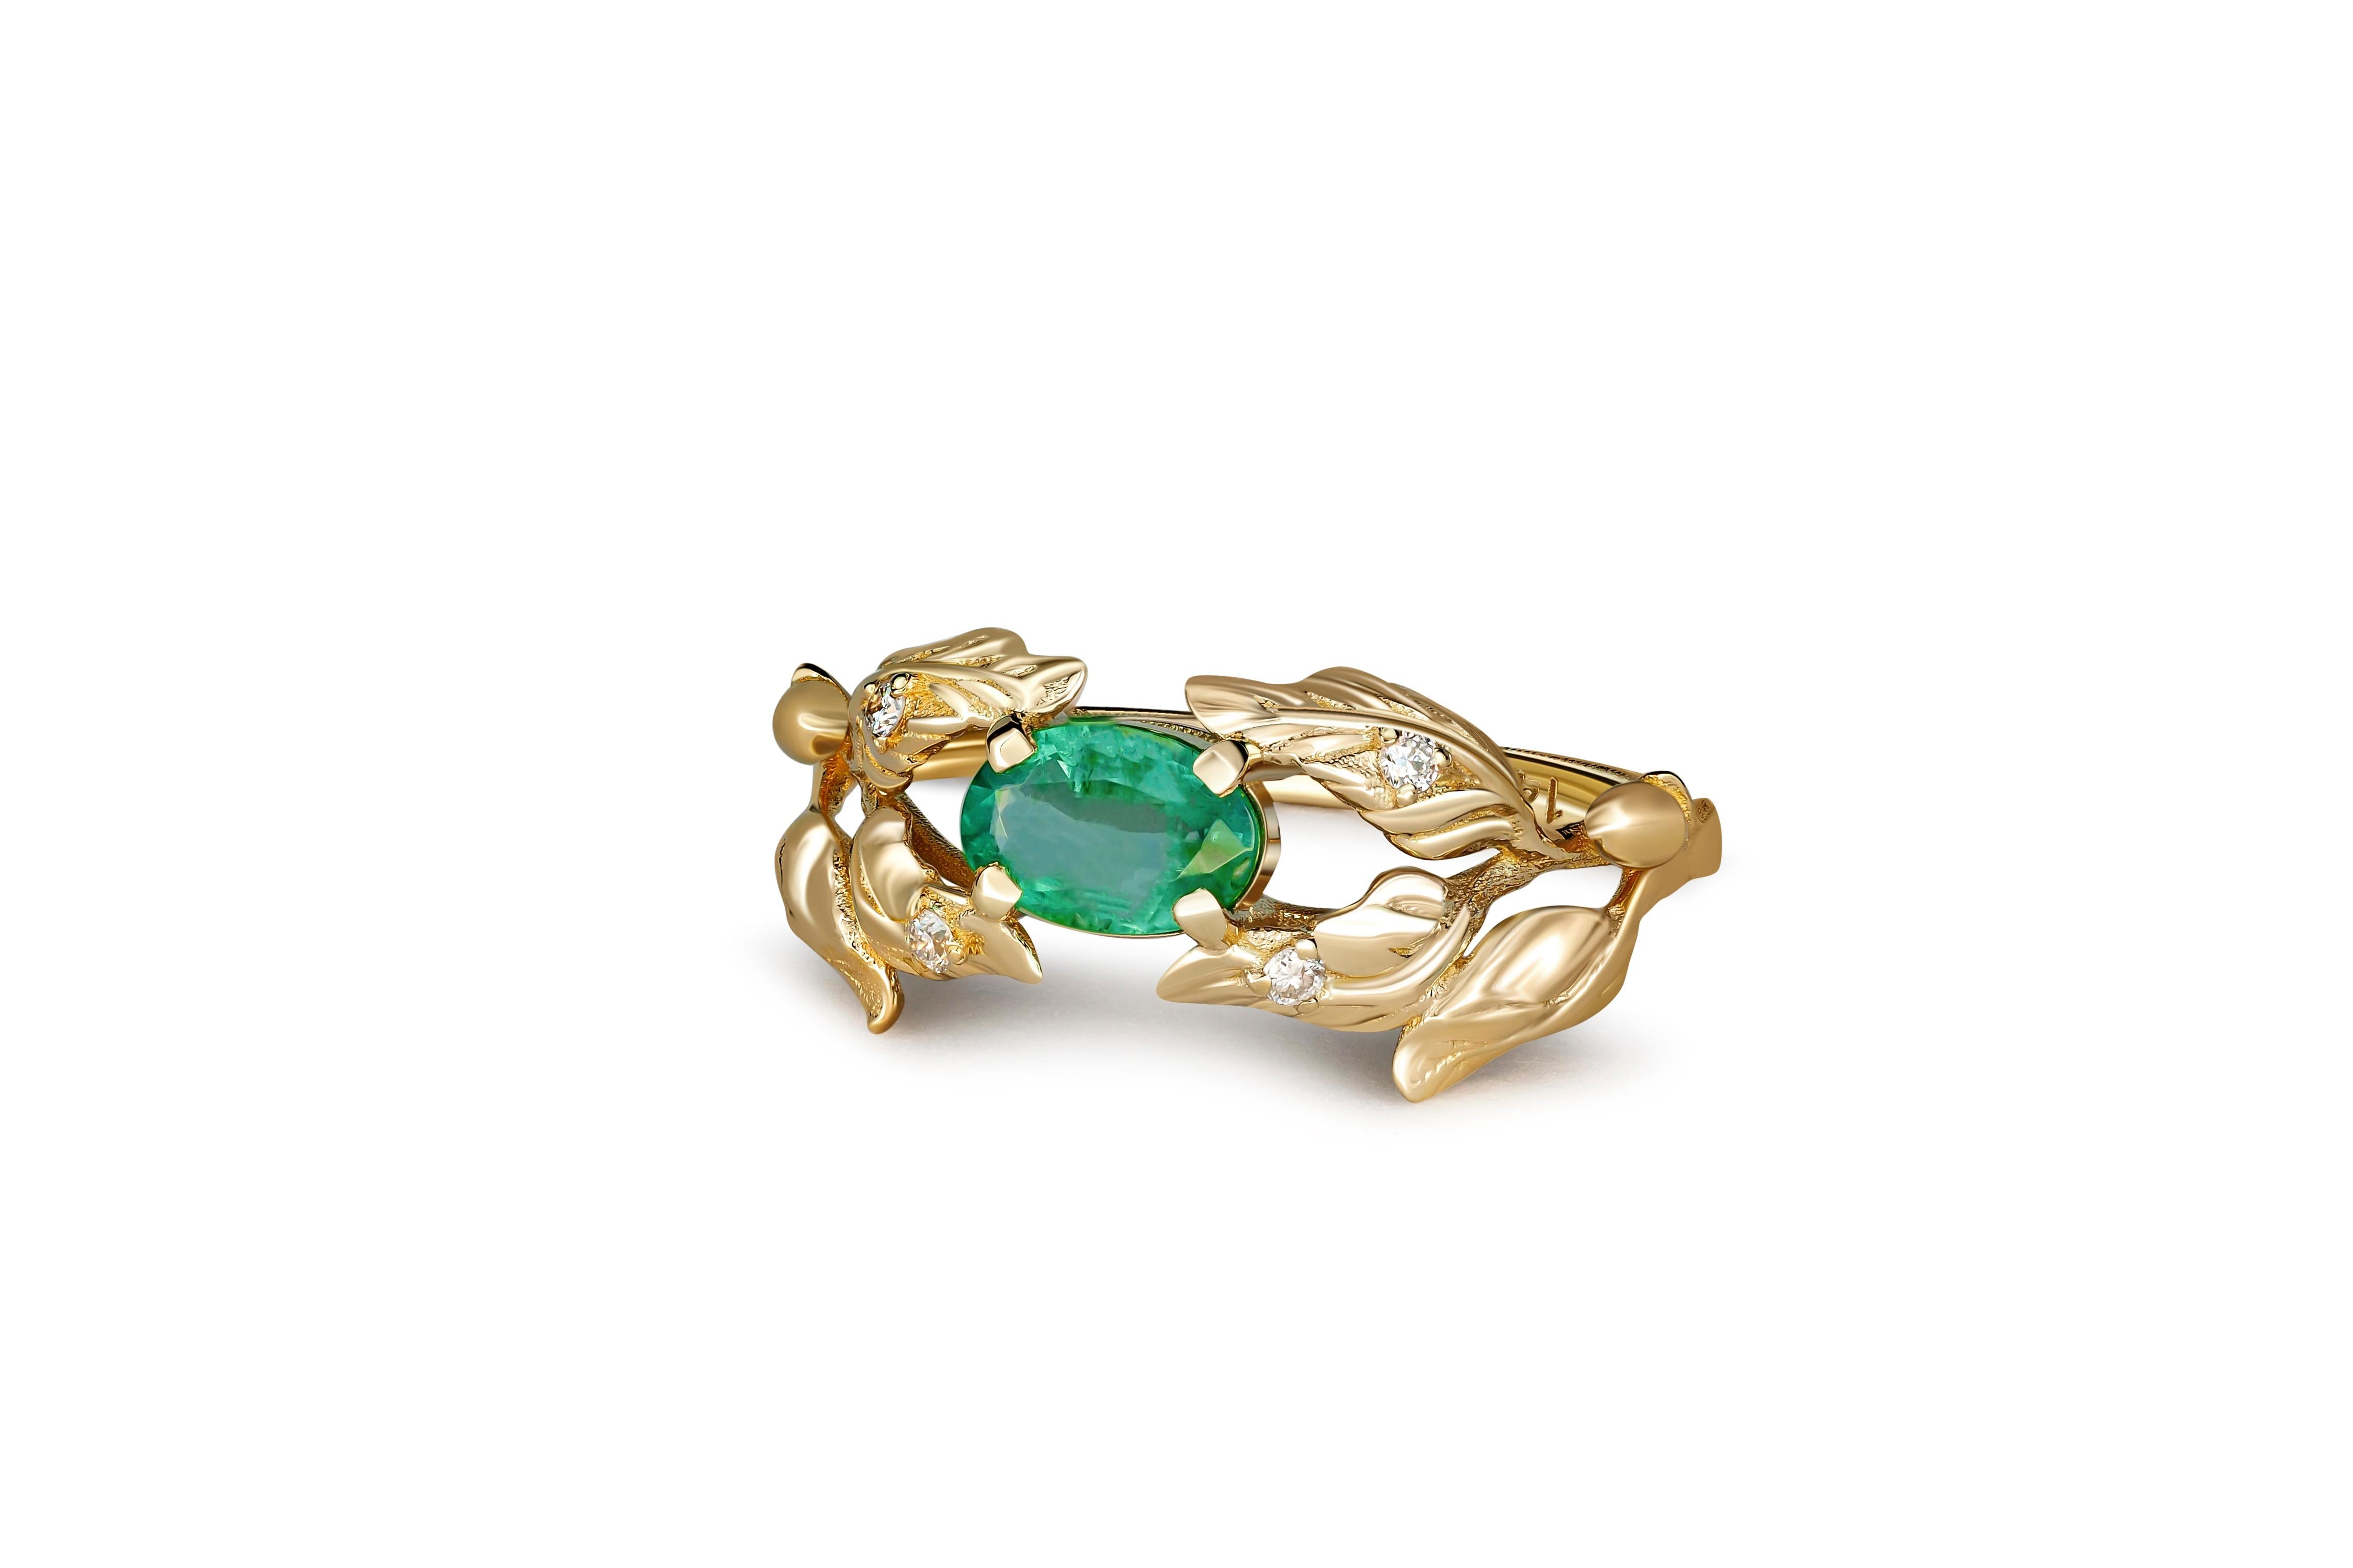 Olive tree gold ring with emerald. 
Oval emerald ring in 14k gold. Branch gold ring. Gold Leaves ring. May birthstone ring. May birthstone ring.

Metal: 14 karat gold
Weight: 2.3 g. depends from size.

Set with emerald, color - green  
Oval cut,